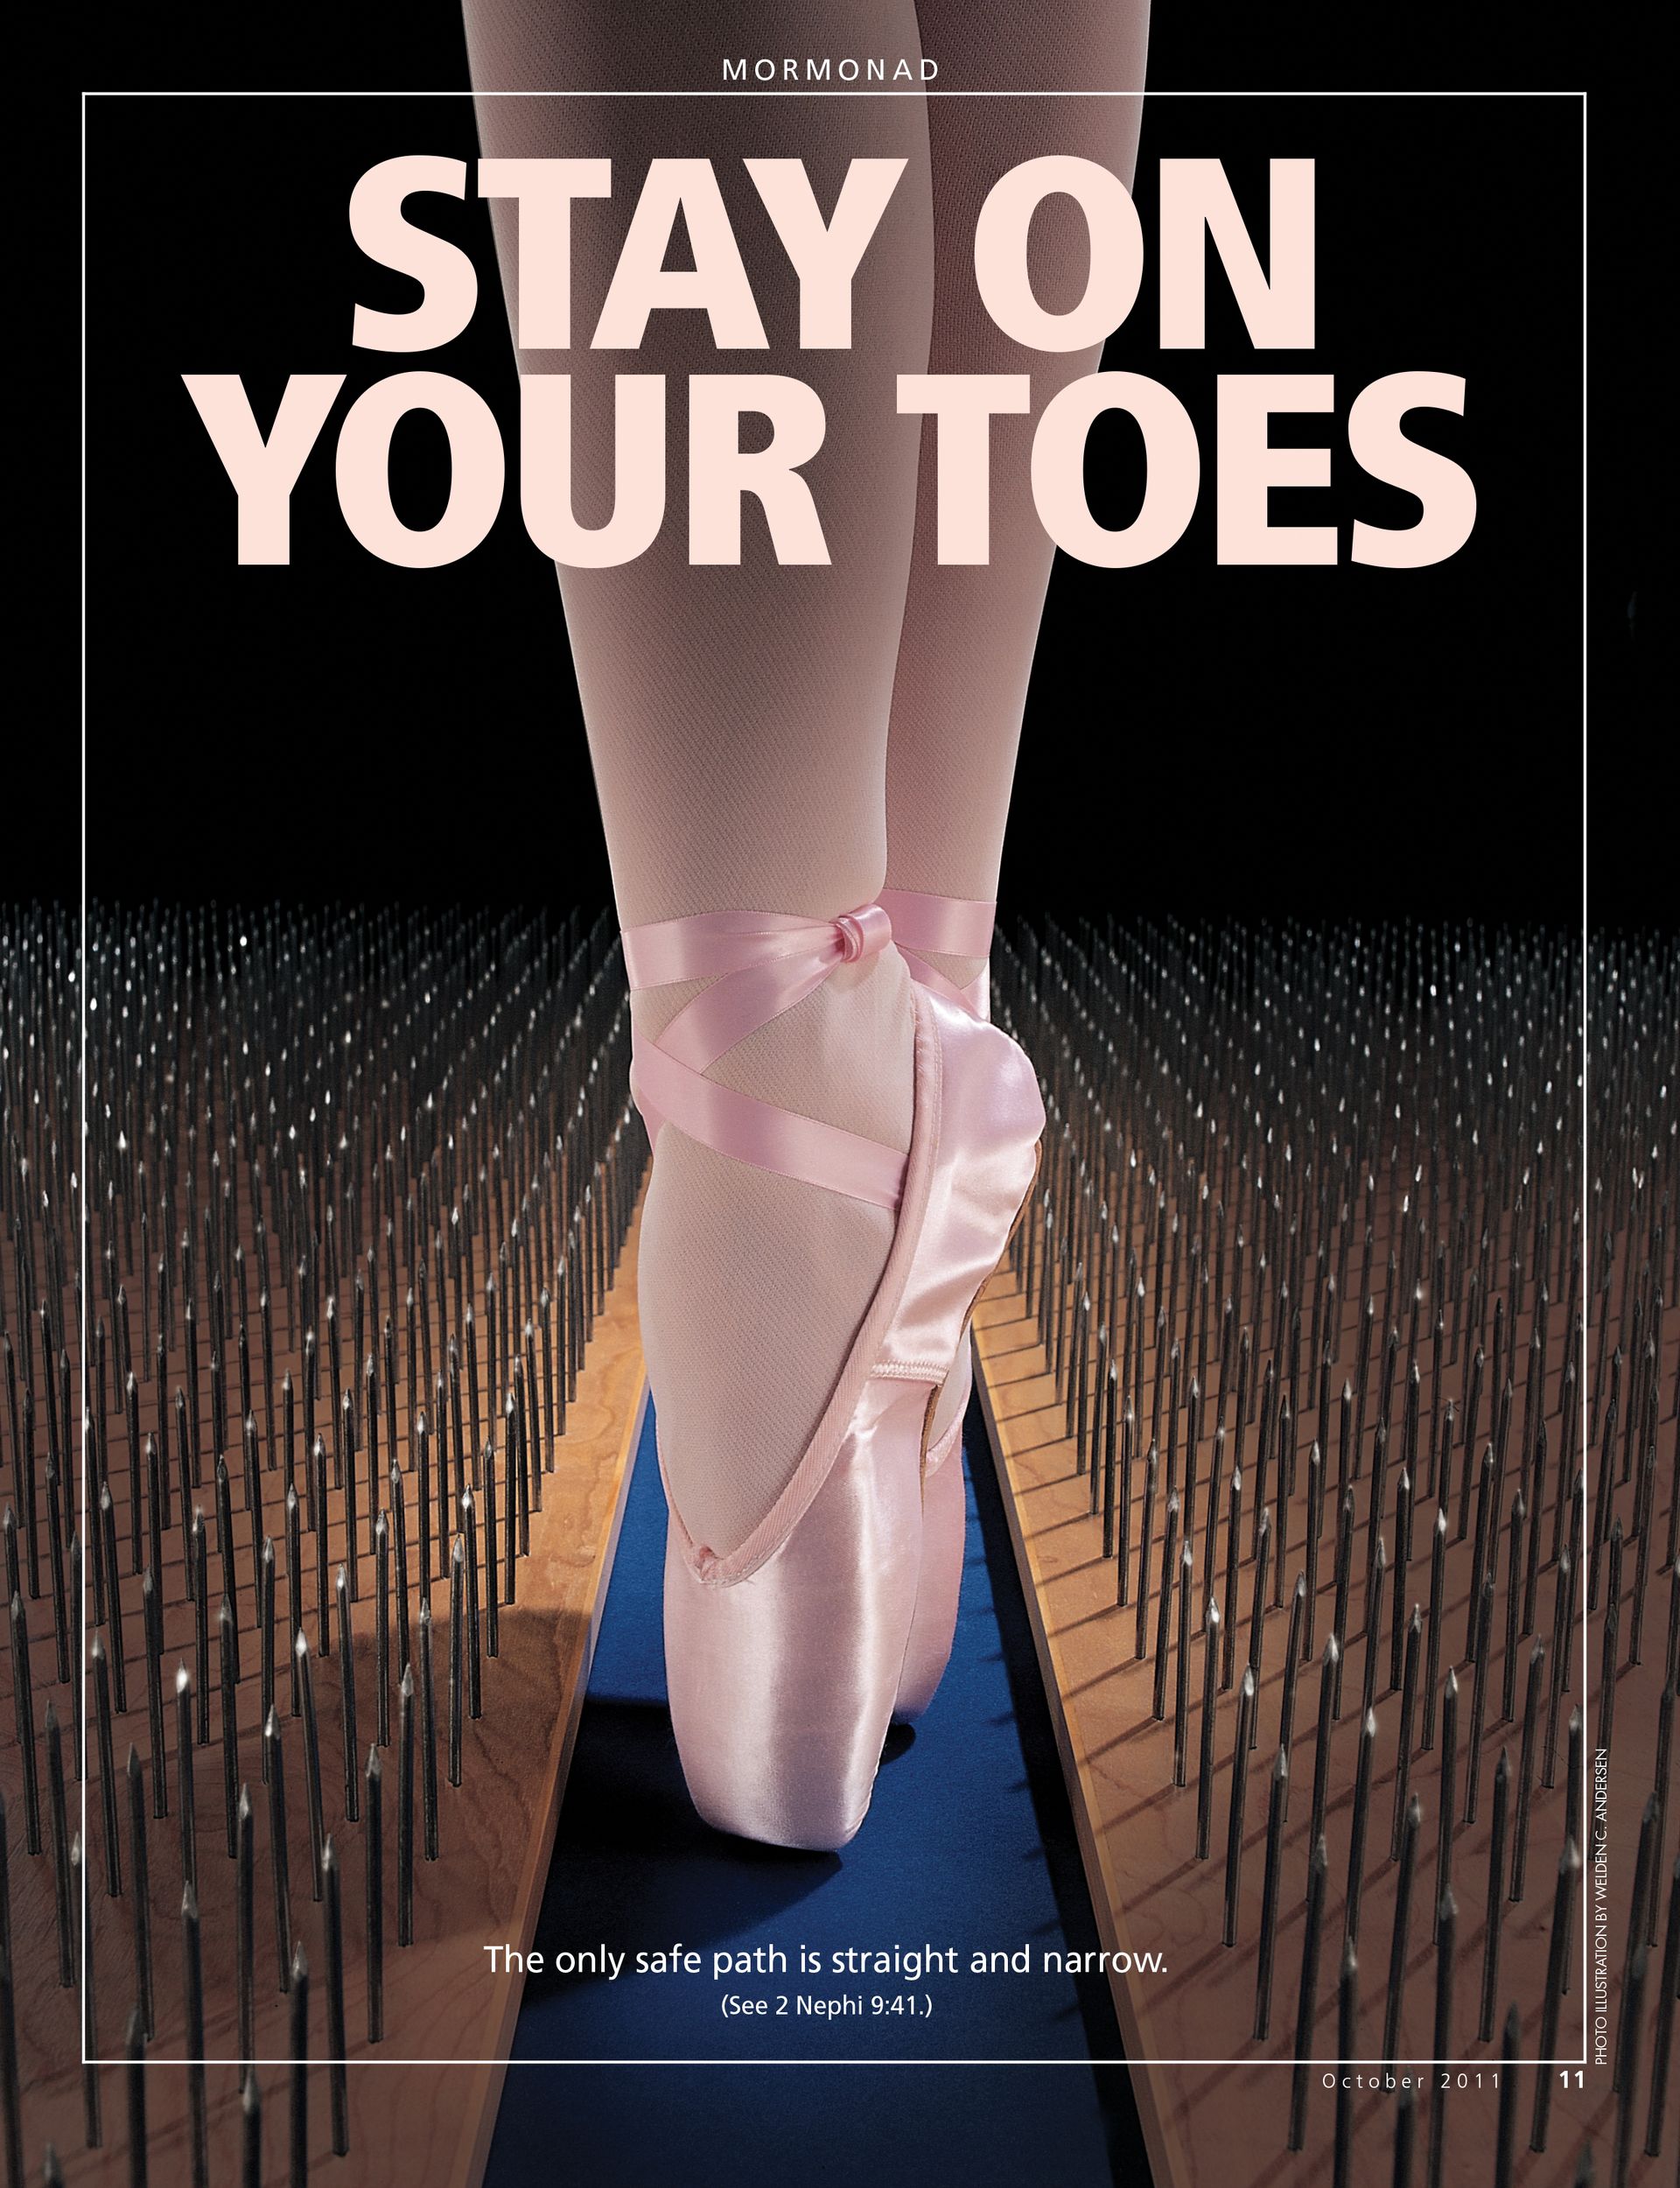 Stay on Your Toes. The only safe path is straight and narrow. (See 2 Nephi 9:41.) Oct. 2011 © undefined ipCode 1.